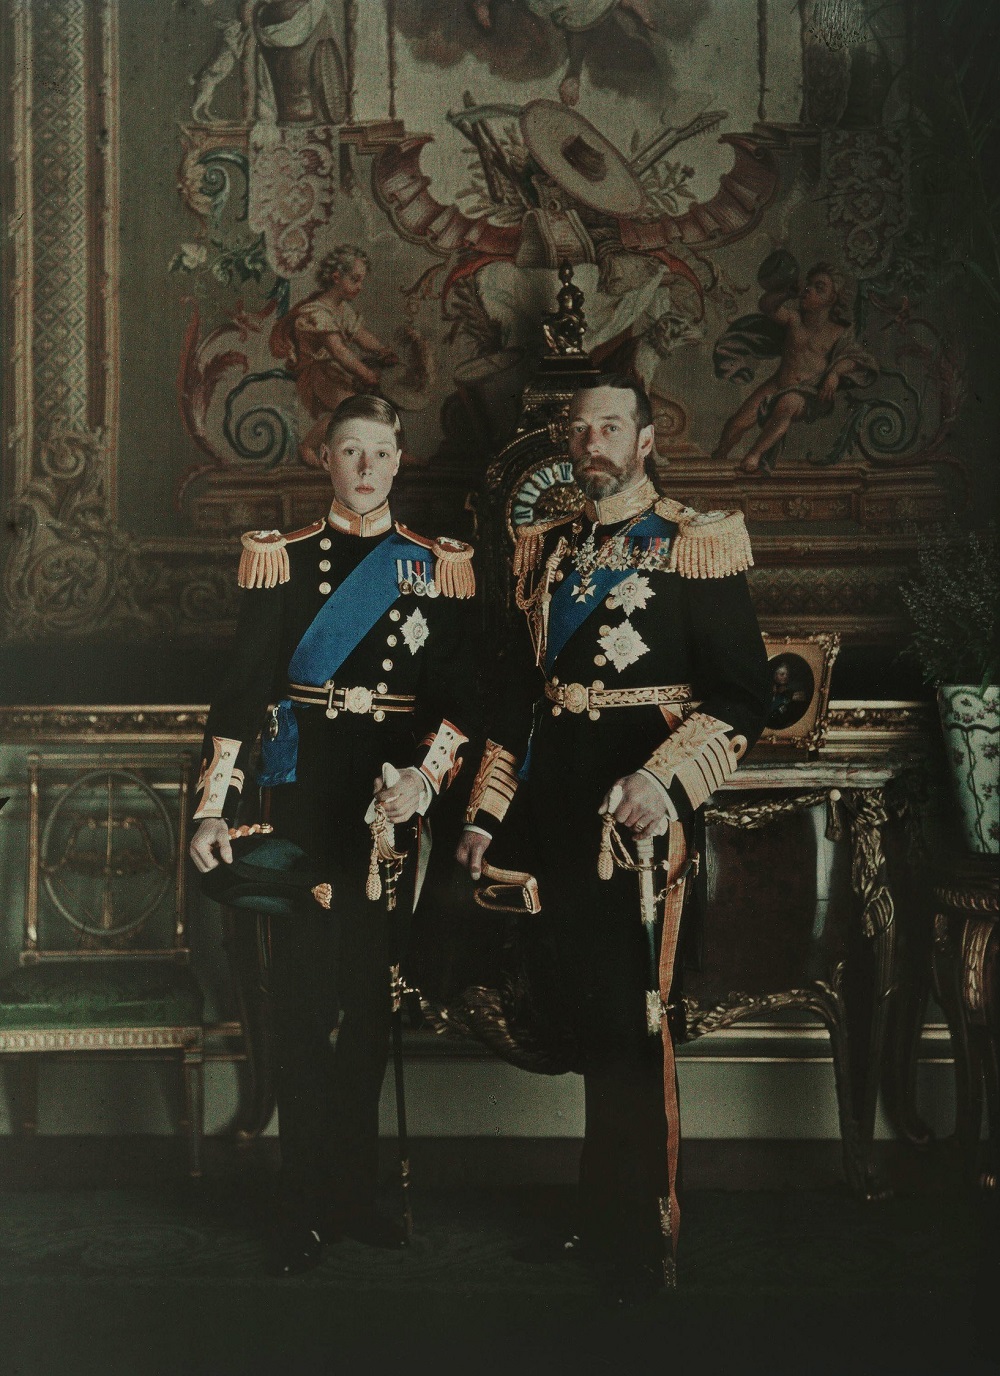 Photograph of George V and Prince of Wales by Desboutin